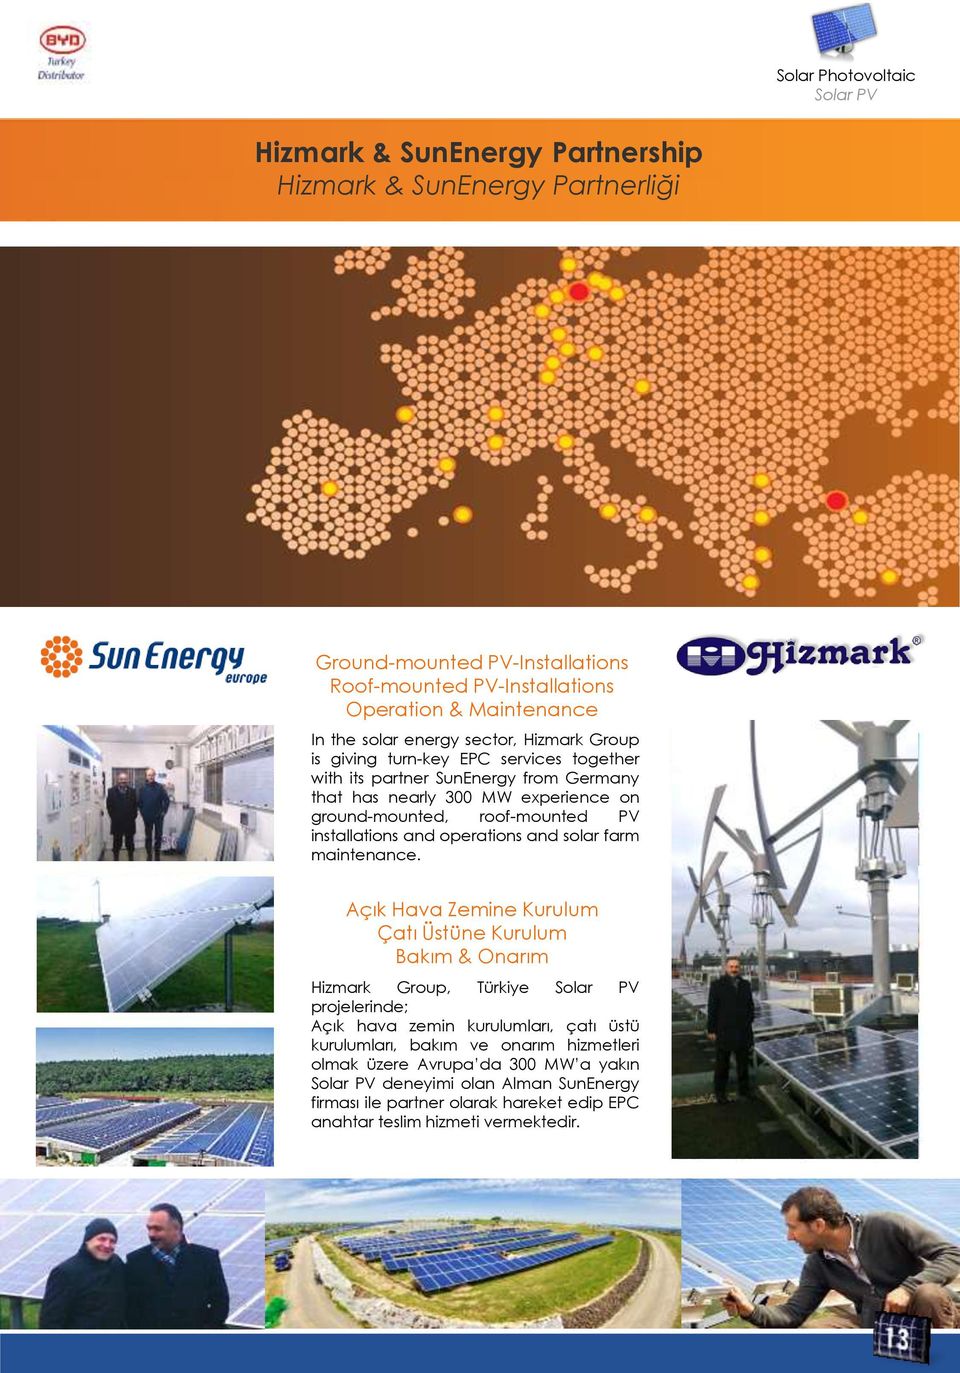 installations and operations and solar farm maintenance.